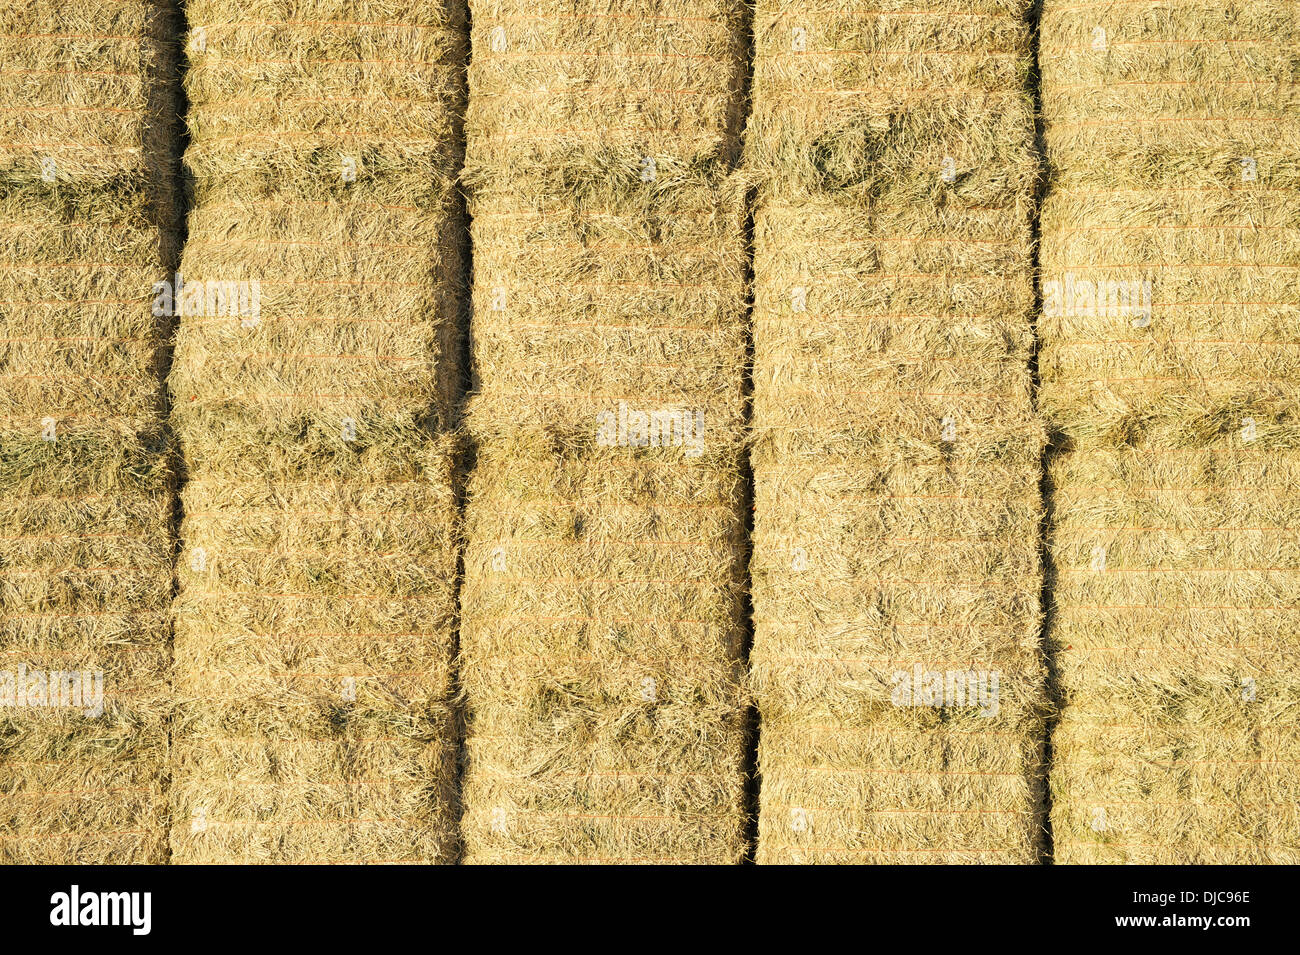 Hay bales line up in rectangular haystack for a textured agricultural background Stock Photo